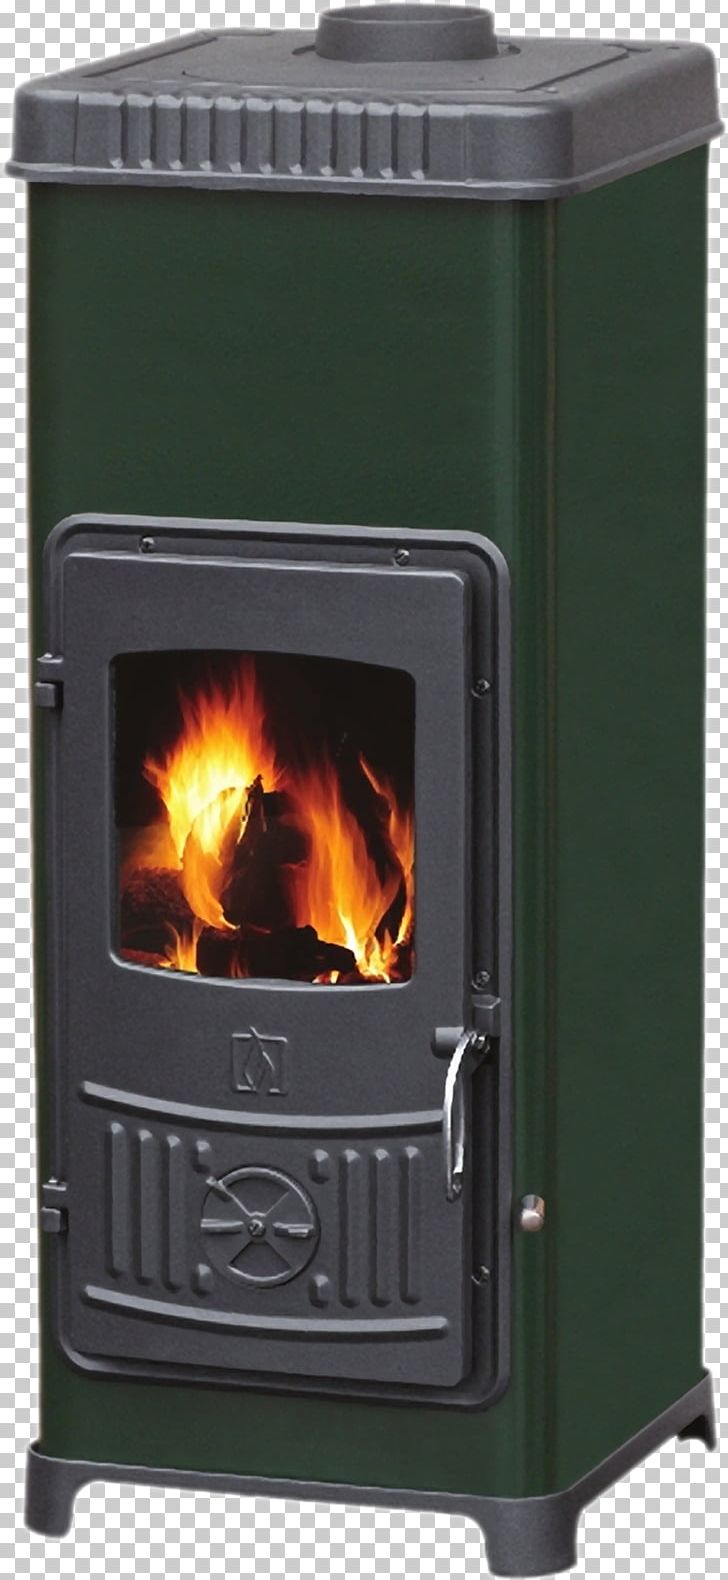 Flame Firebox Green Color Oven PNG, Clipart, Blue, Chimney, Color, Combustion, Cooking Ranges Free PNG Download